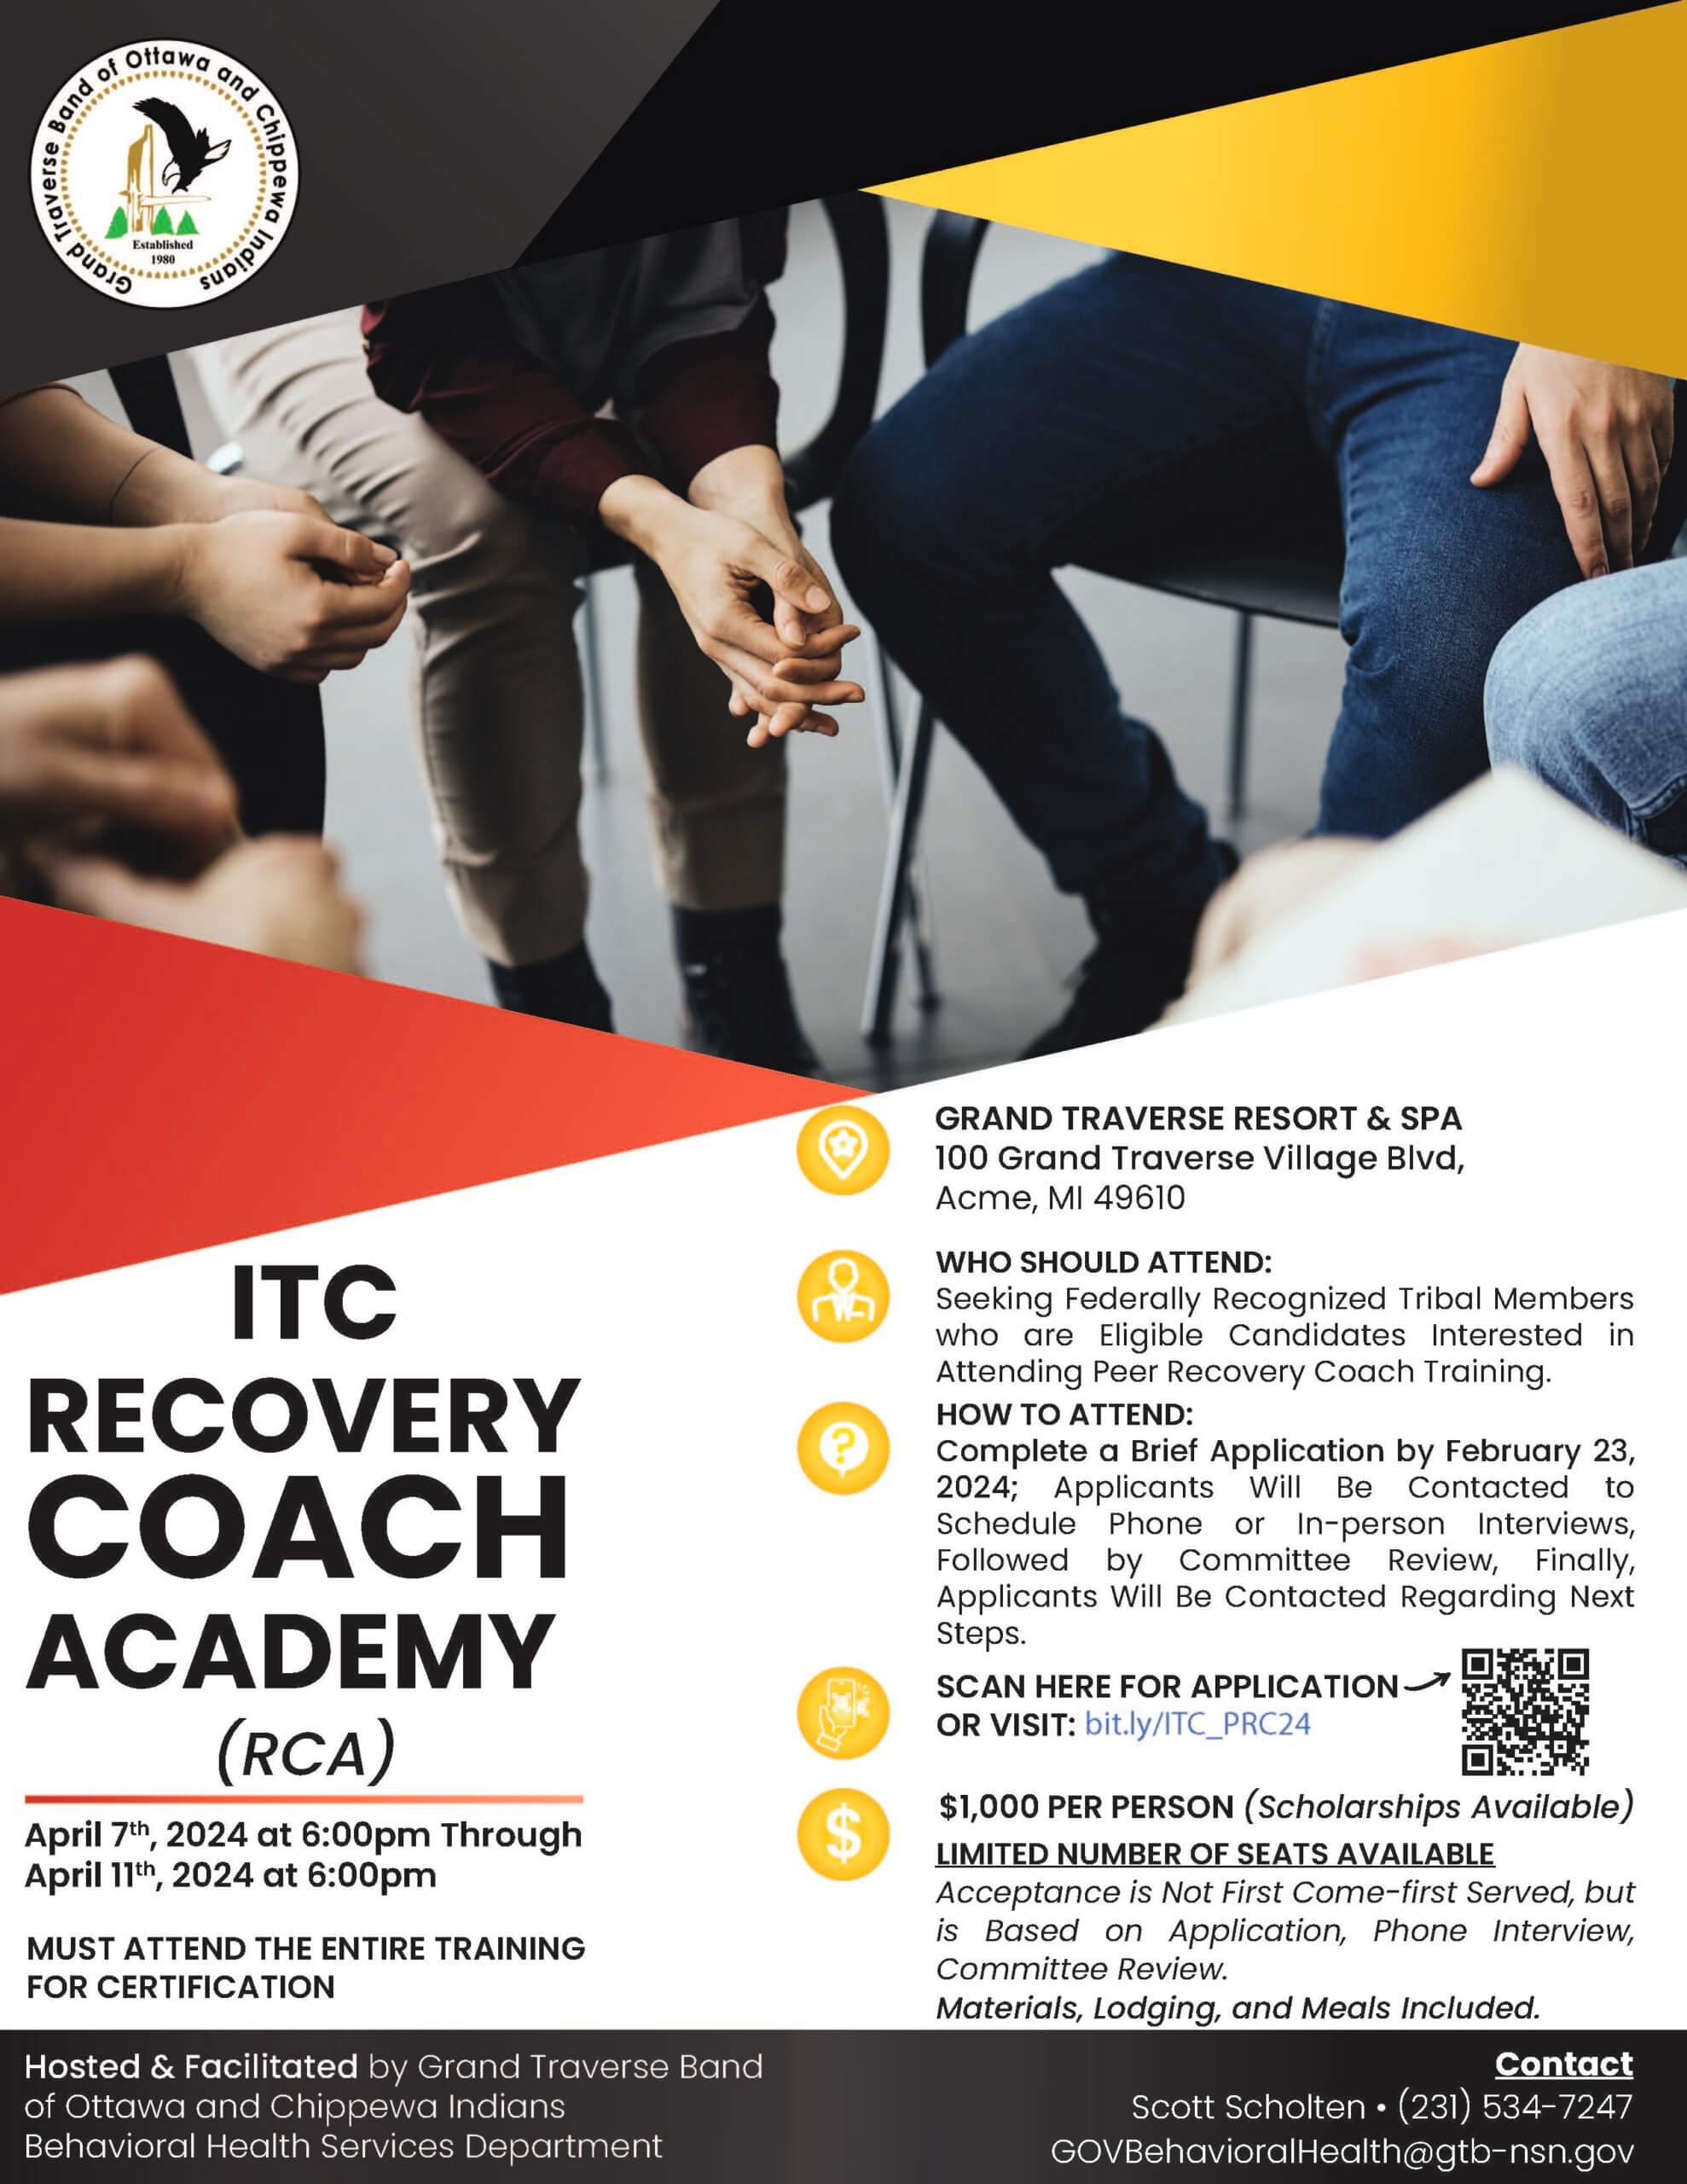 April 7 – 11, 2024 Recovery Coach Academy